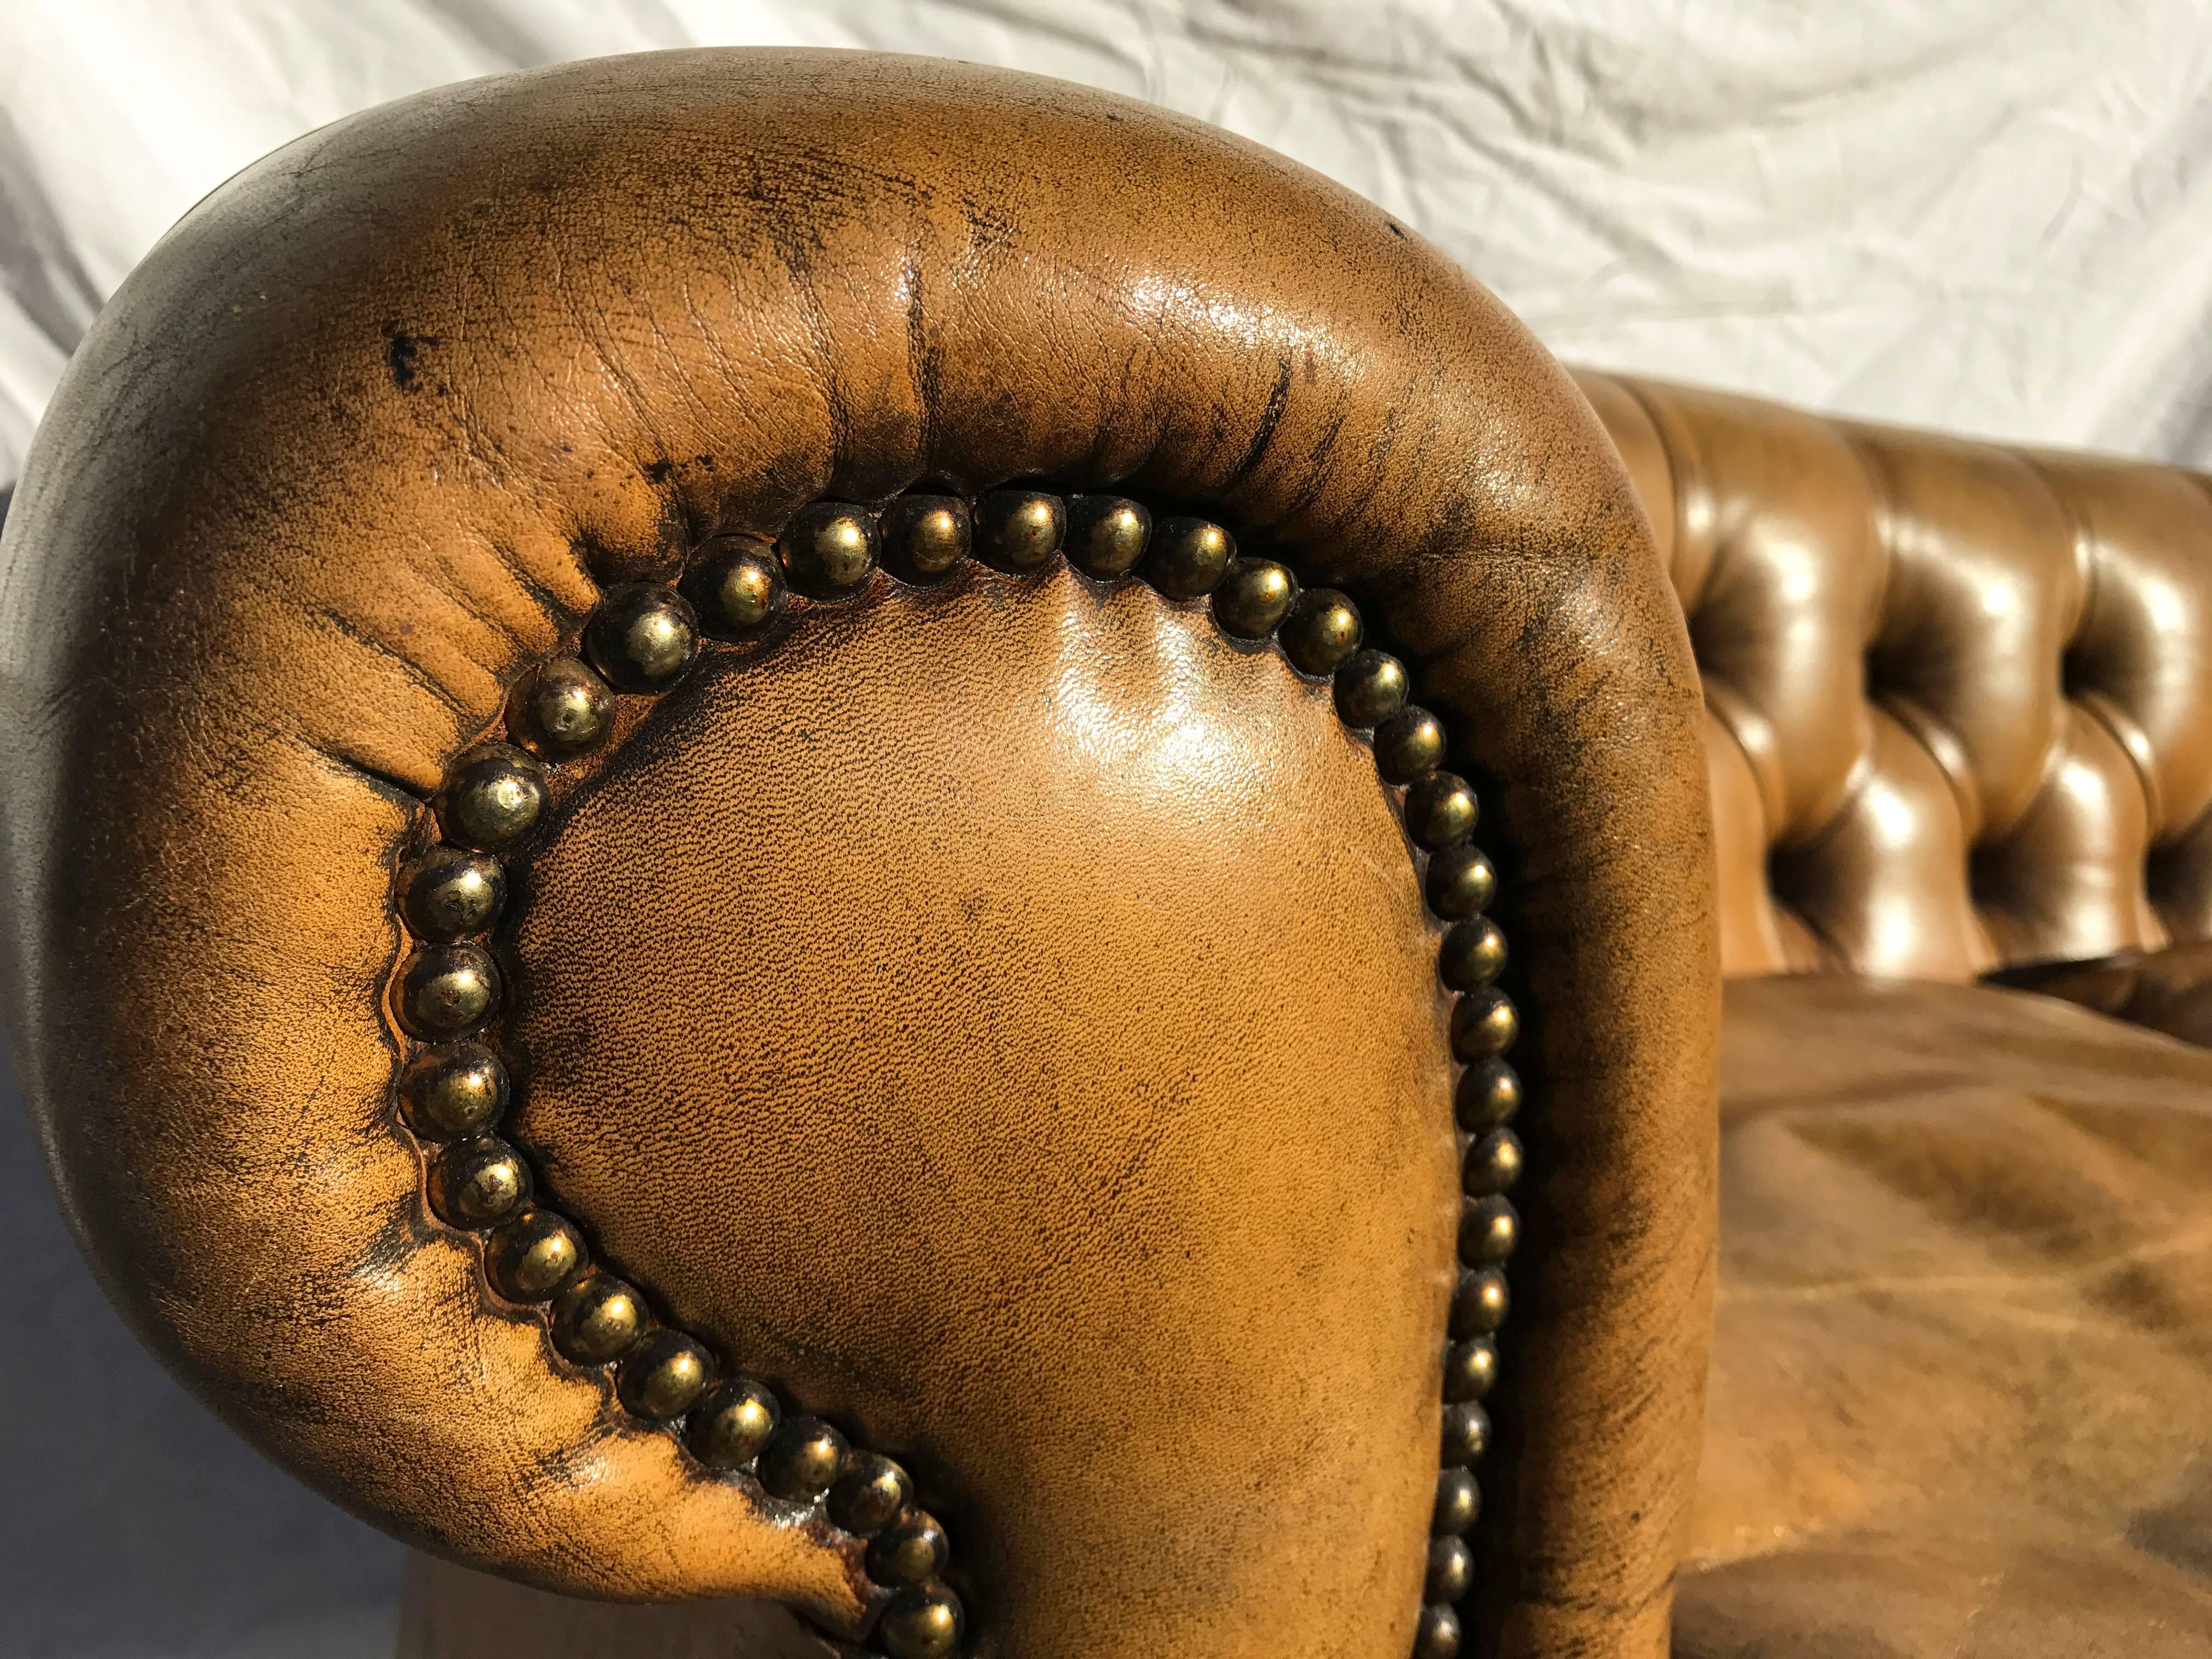 Curved Leather Chesterfield, circa Early 20th Century In Good Condition For Sale In Napa, CA